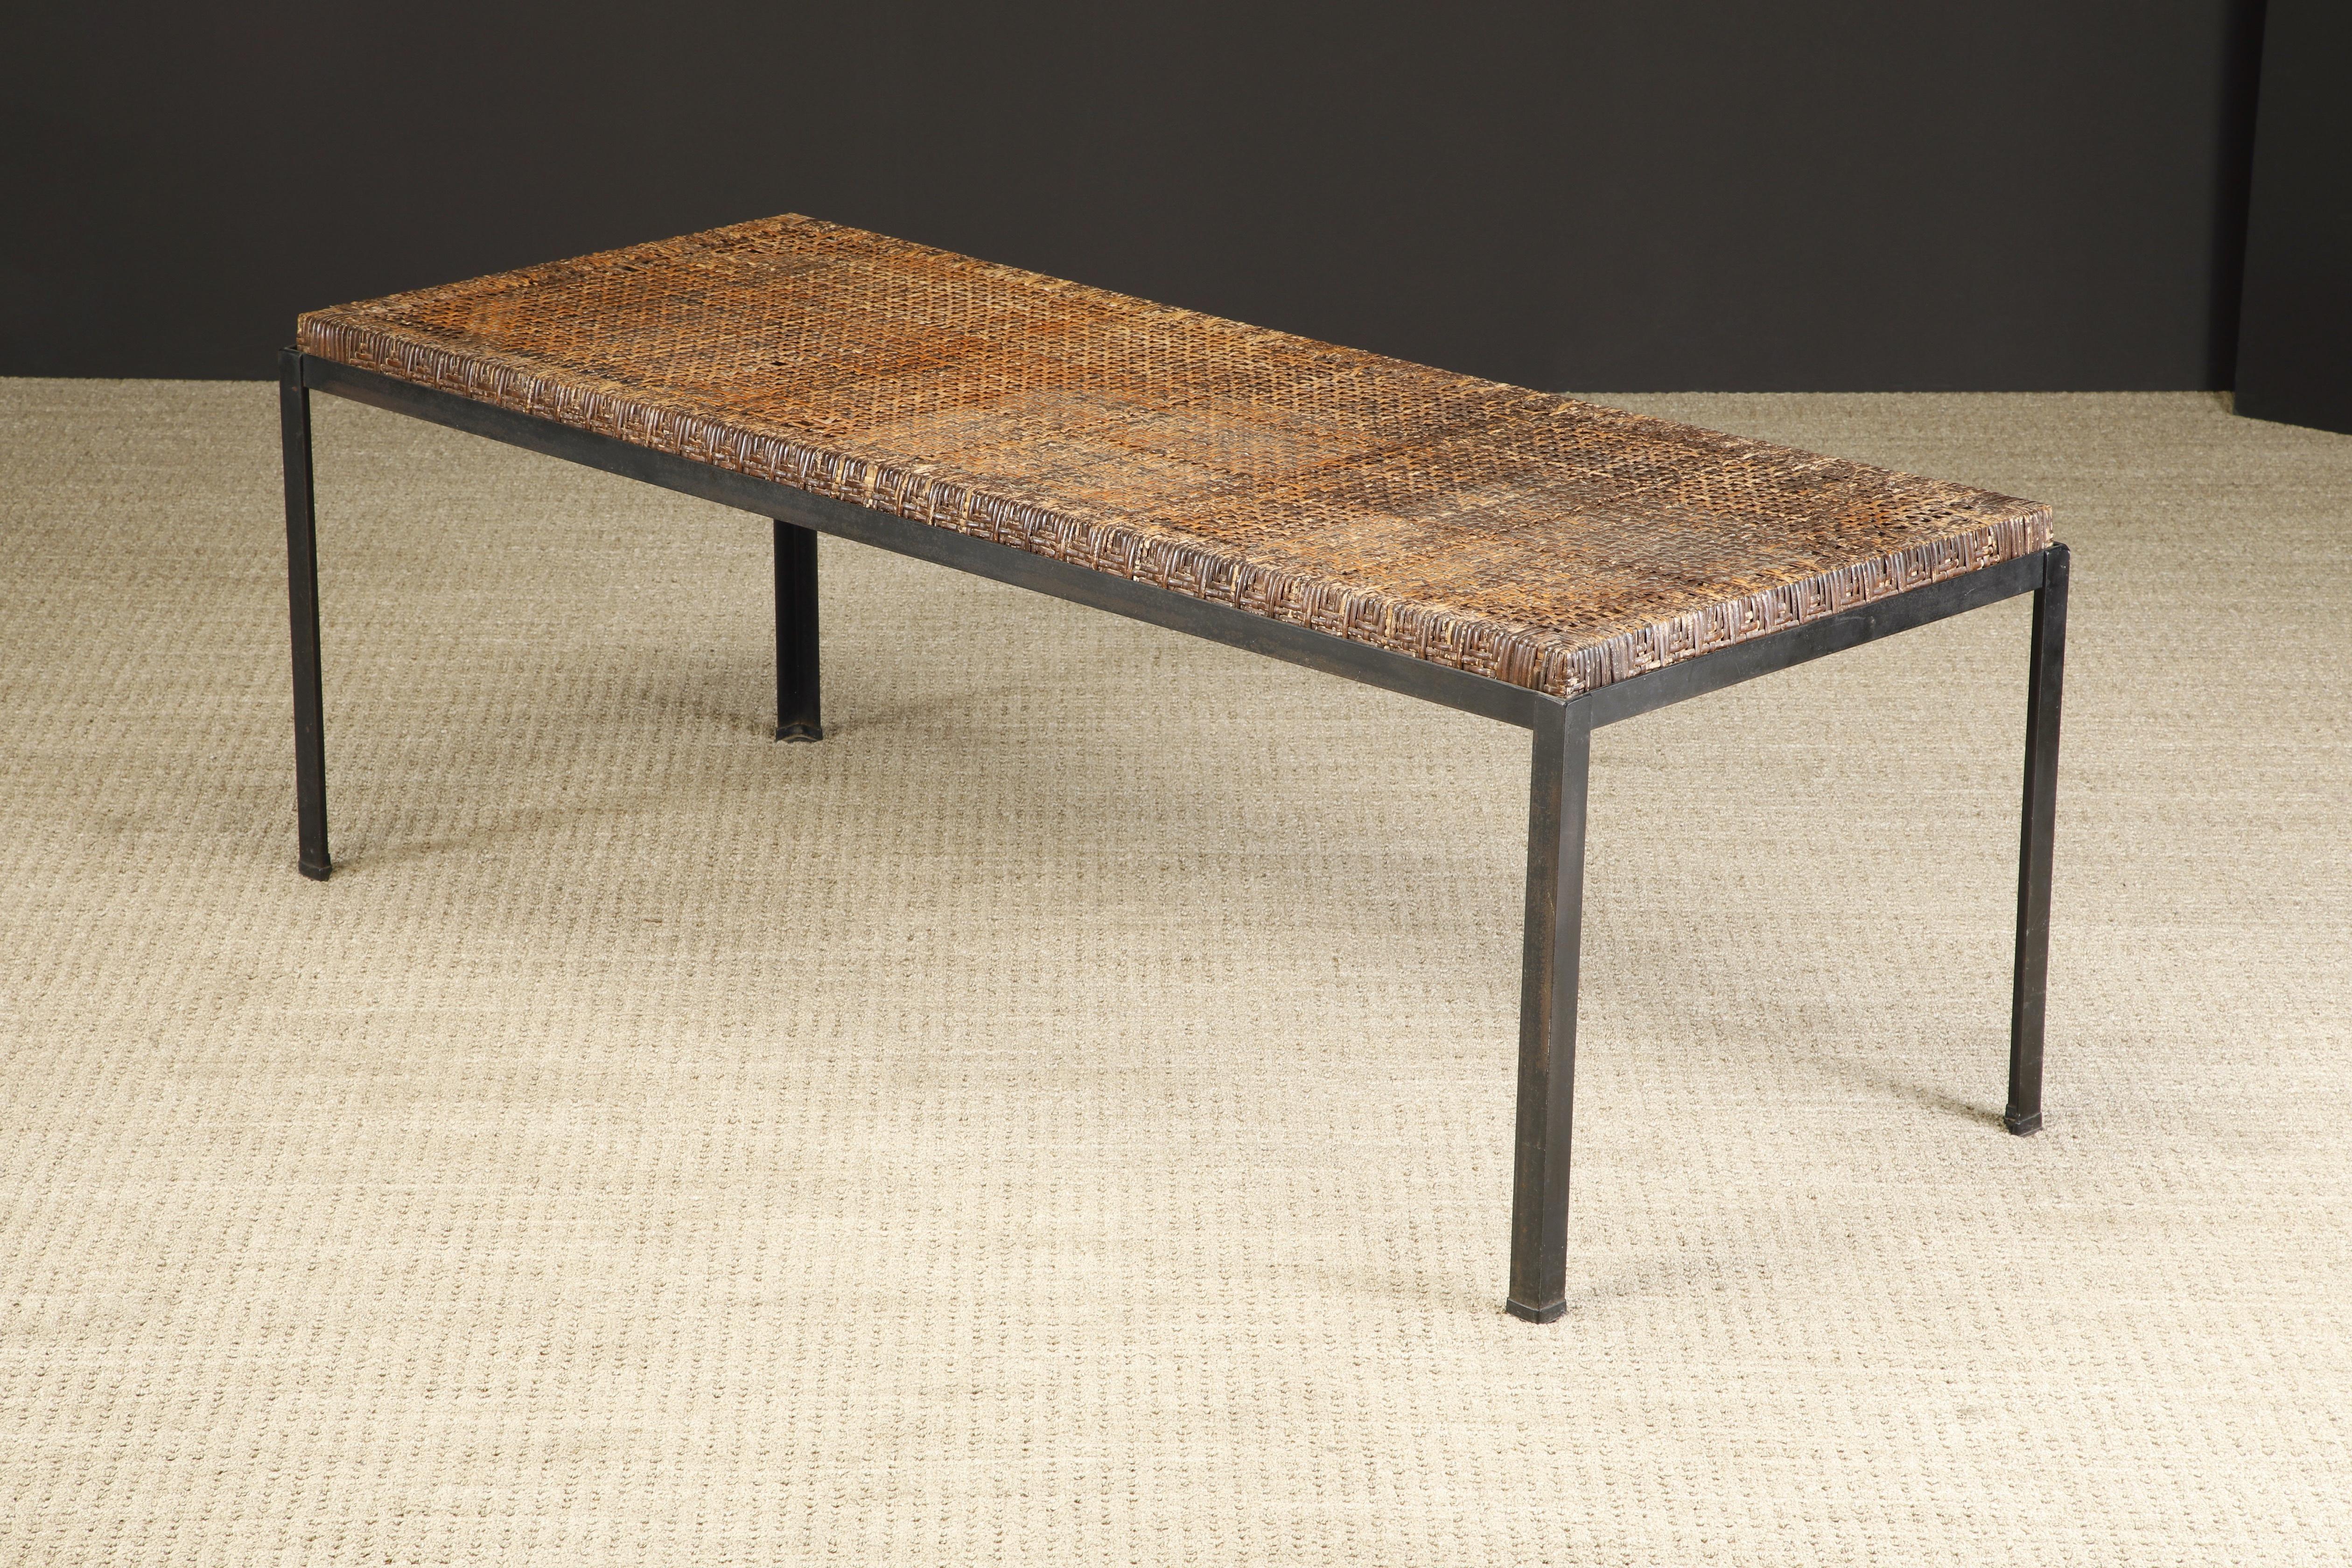 Caned Dining Table by Danny Ho Fong for Tropi-cal in Iron and Rattan, c 1960s For Sale 1